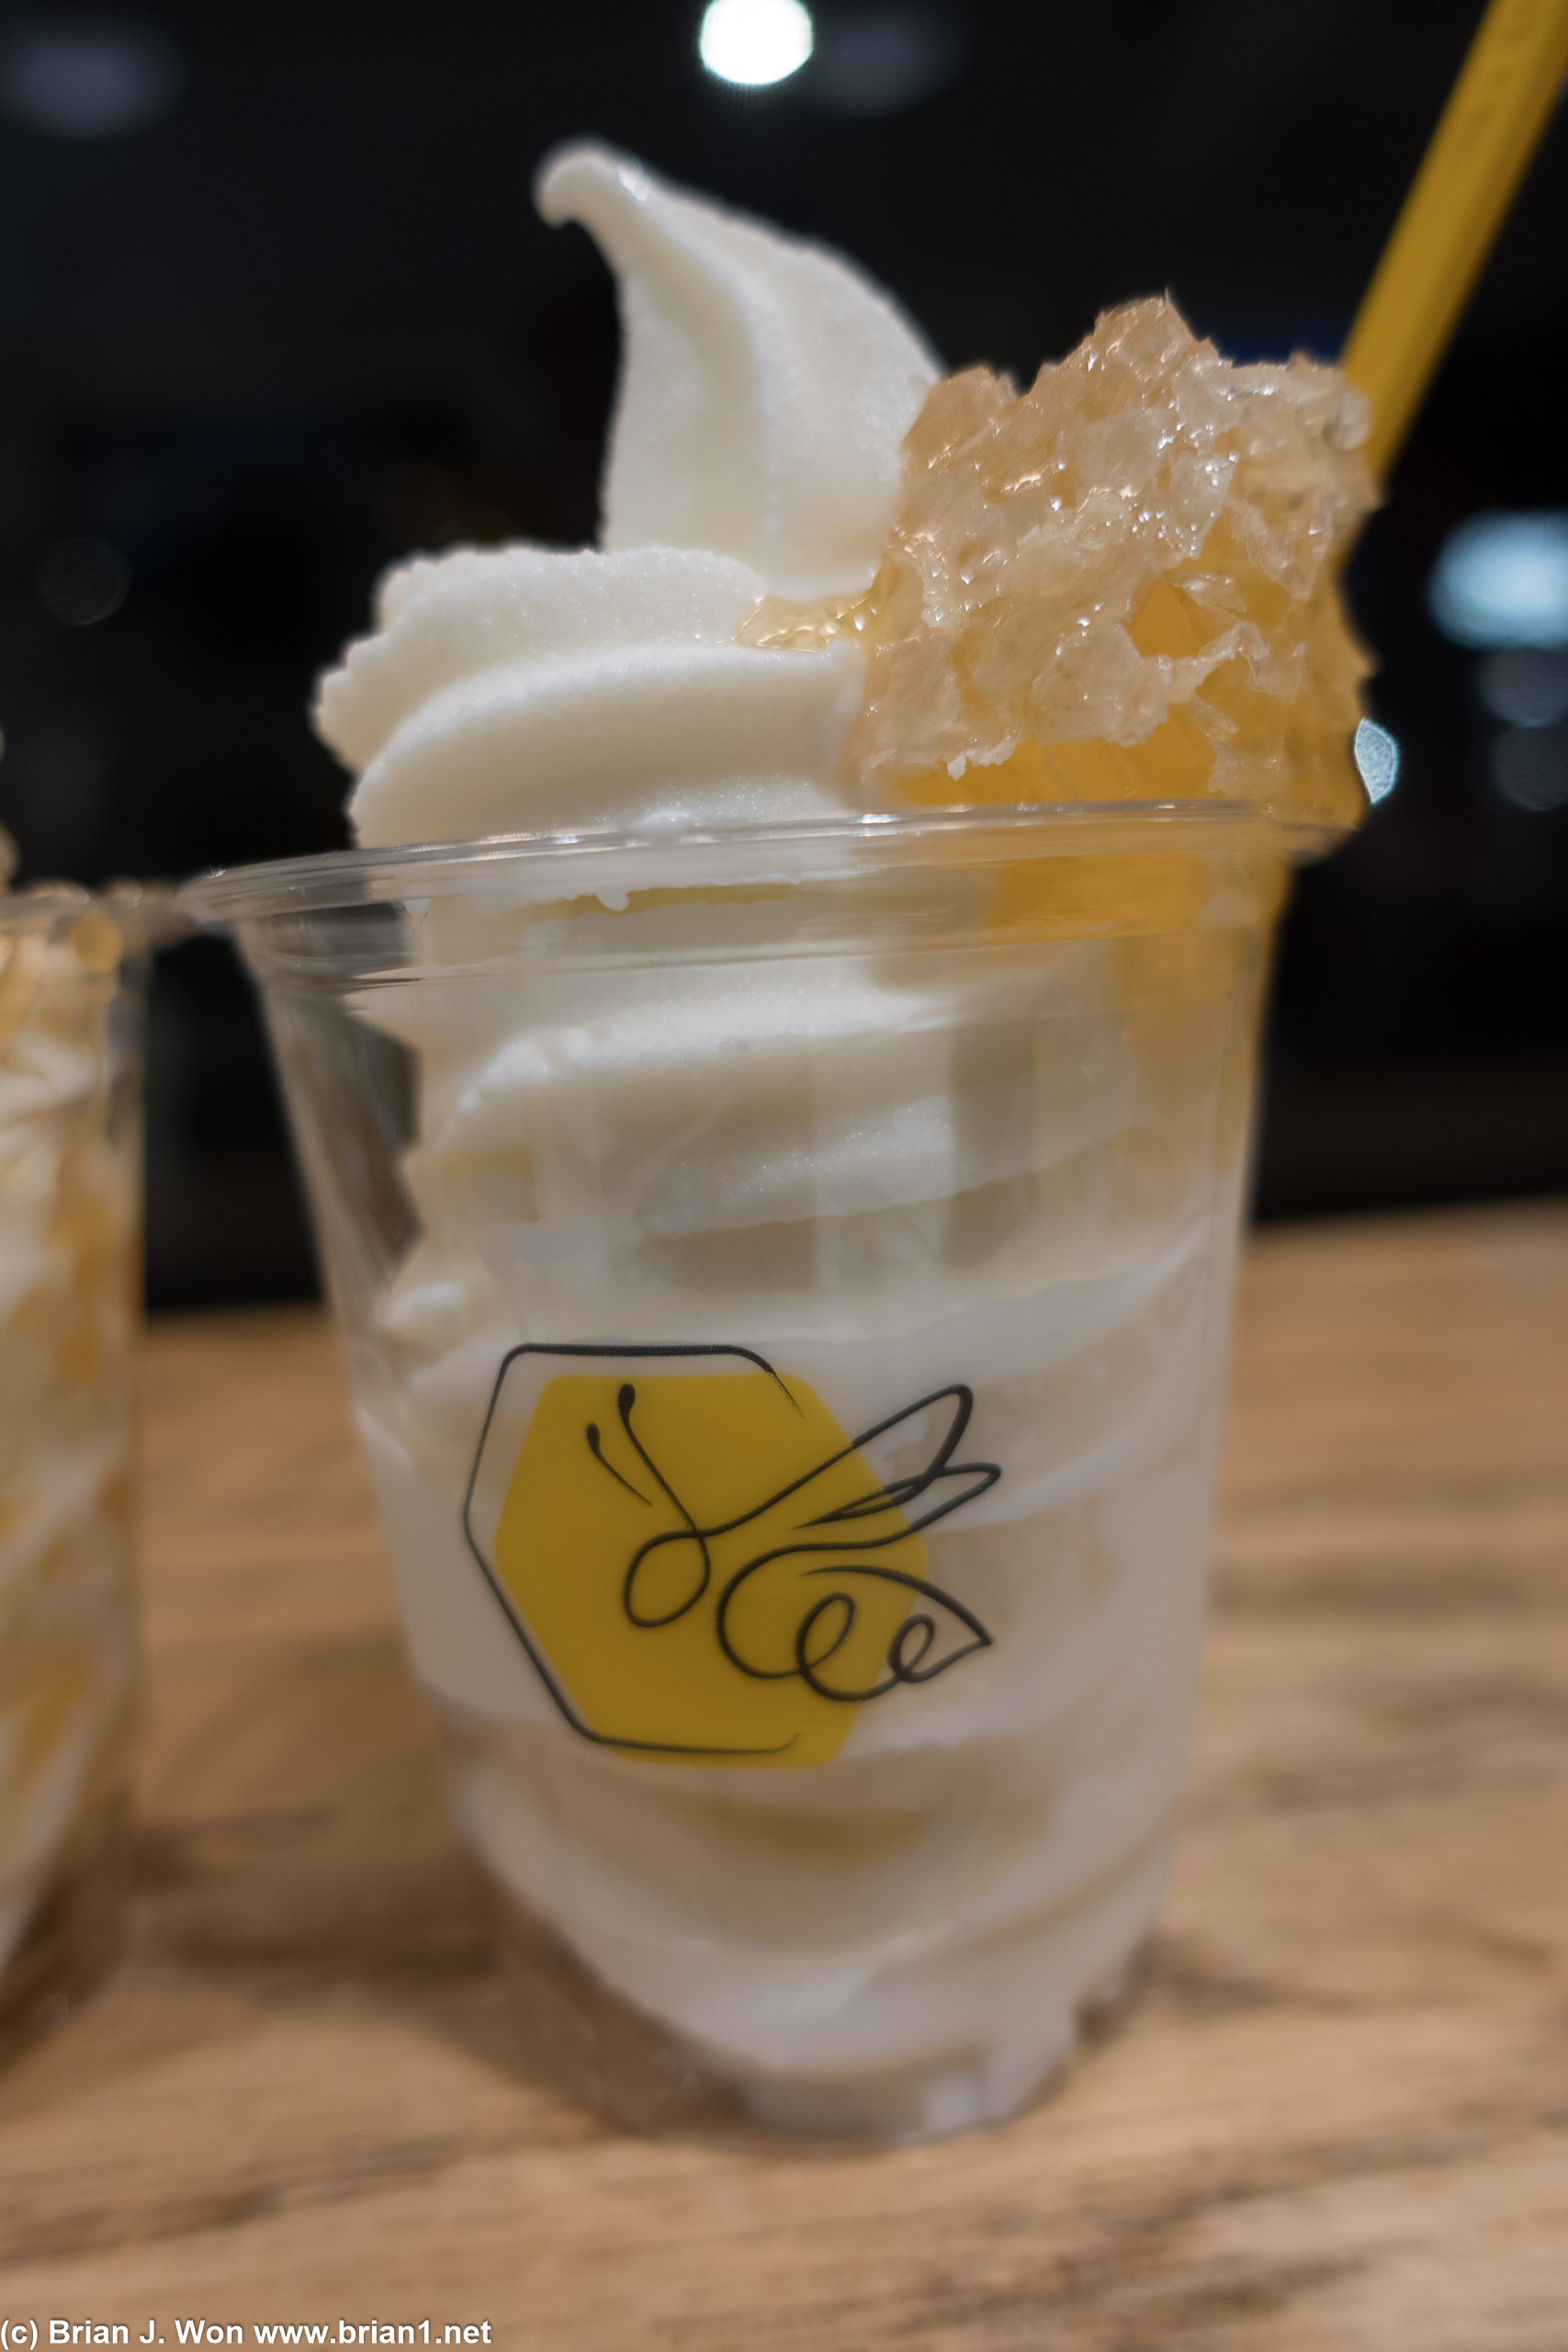 Close-up of the Honeymee.